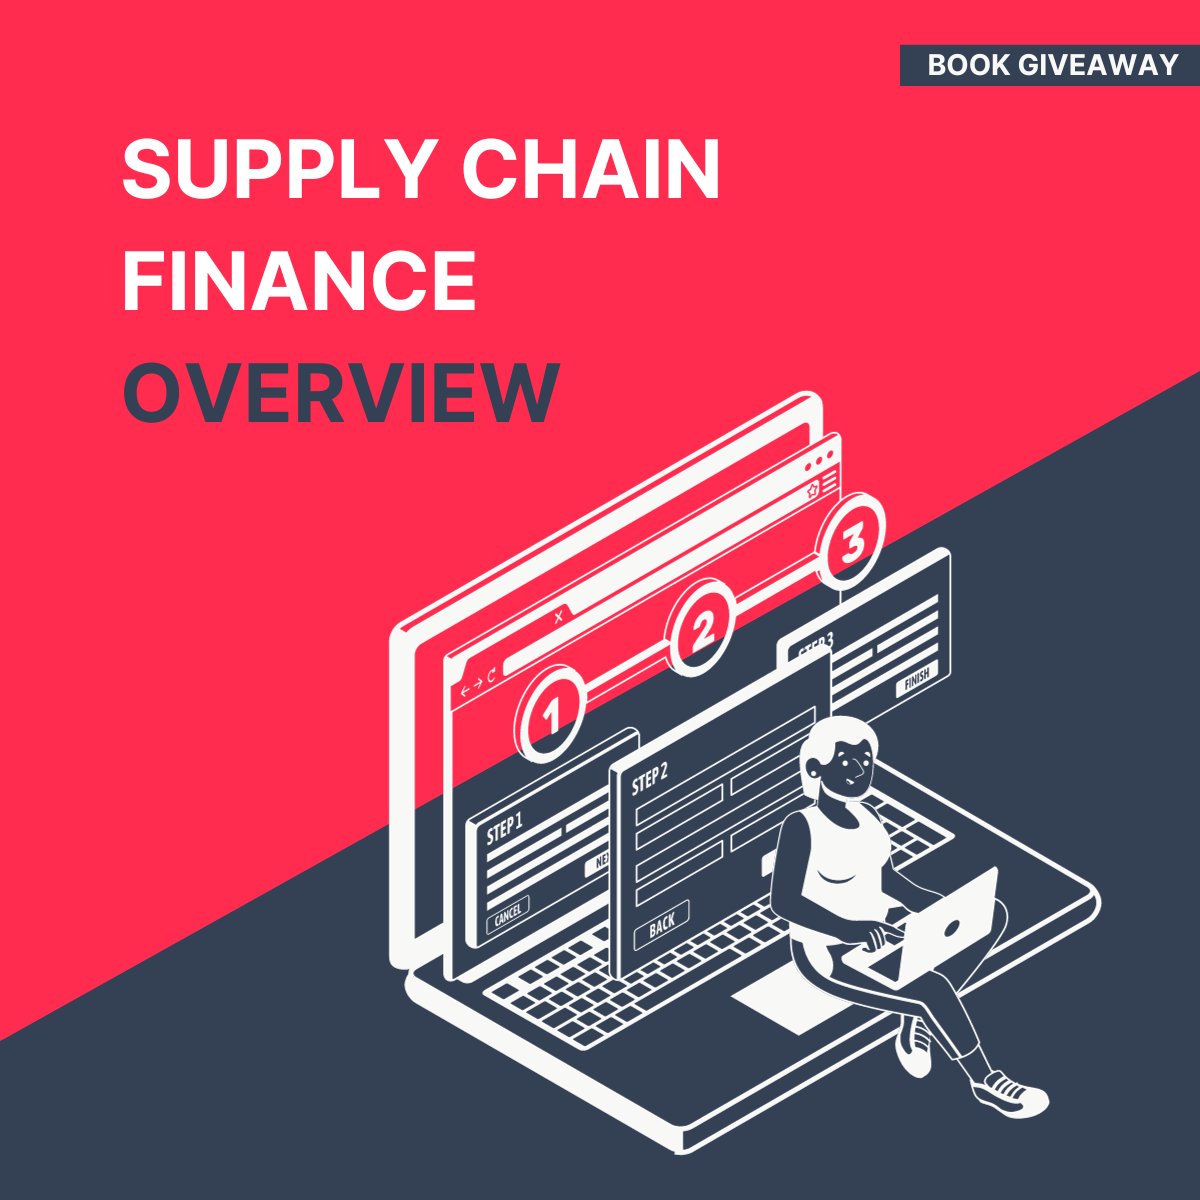 Get a comprehensive understanding of Supply Chain Finance with our new content series, authored by @OliverBelin. Check out the article here - calculum.ai/supply-chain-f… #supplychain #supplychainfinance #procurement #workingcapital #treasury